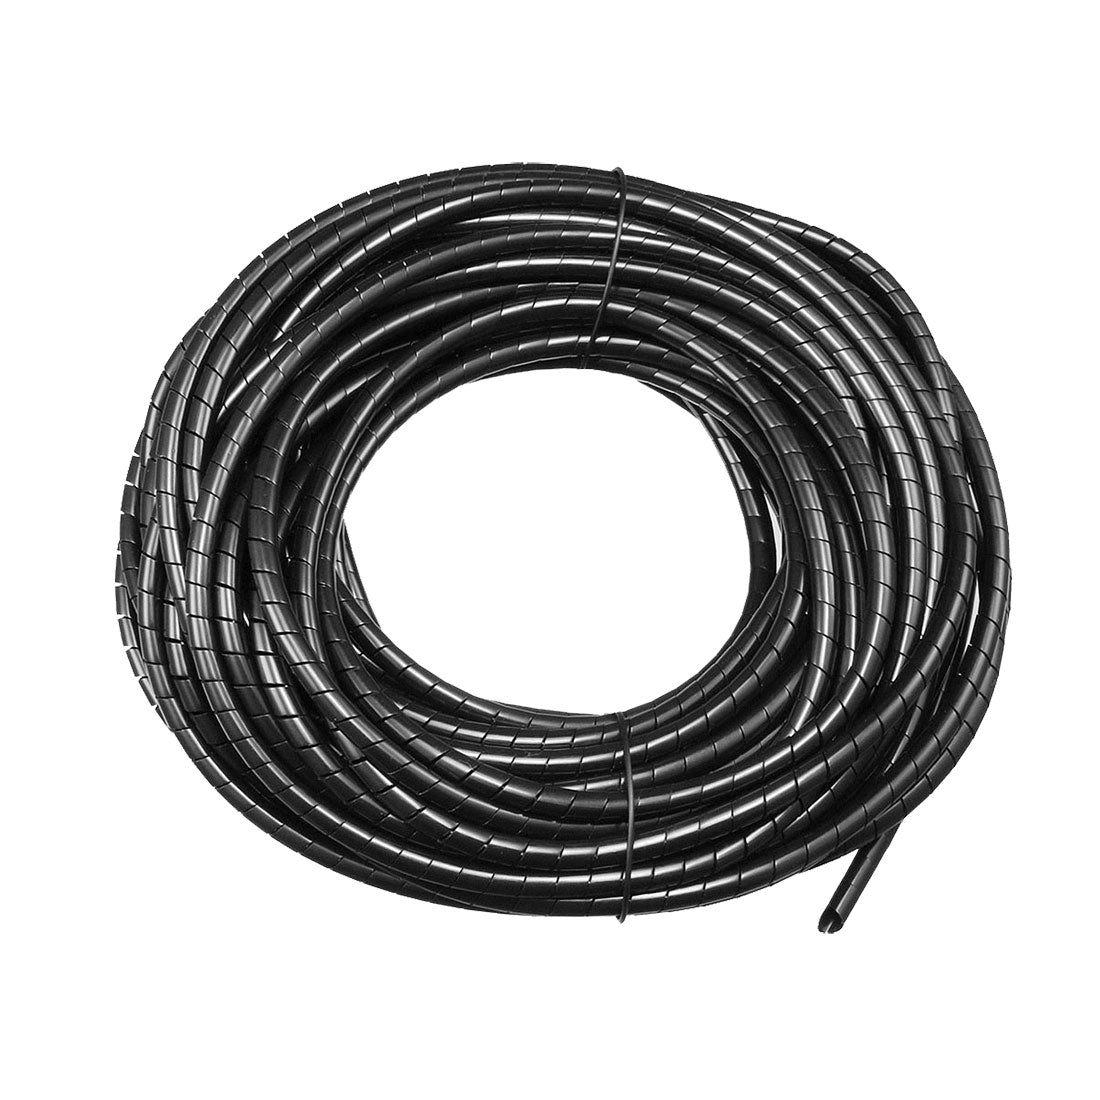 uxcell Uxcell 2.8mm Flexible Spiral Tube Cable Wire Wrap Manage Cord 22M Length Black